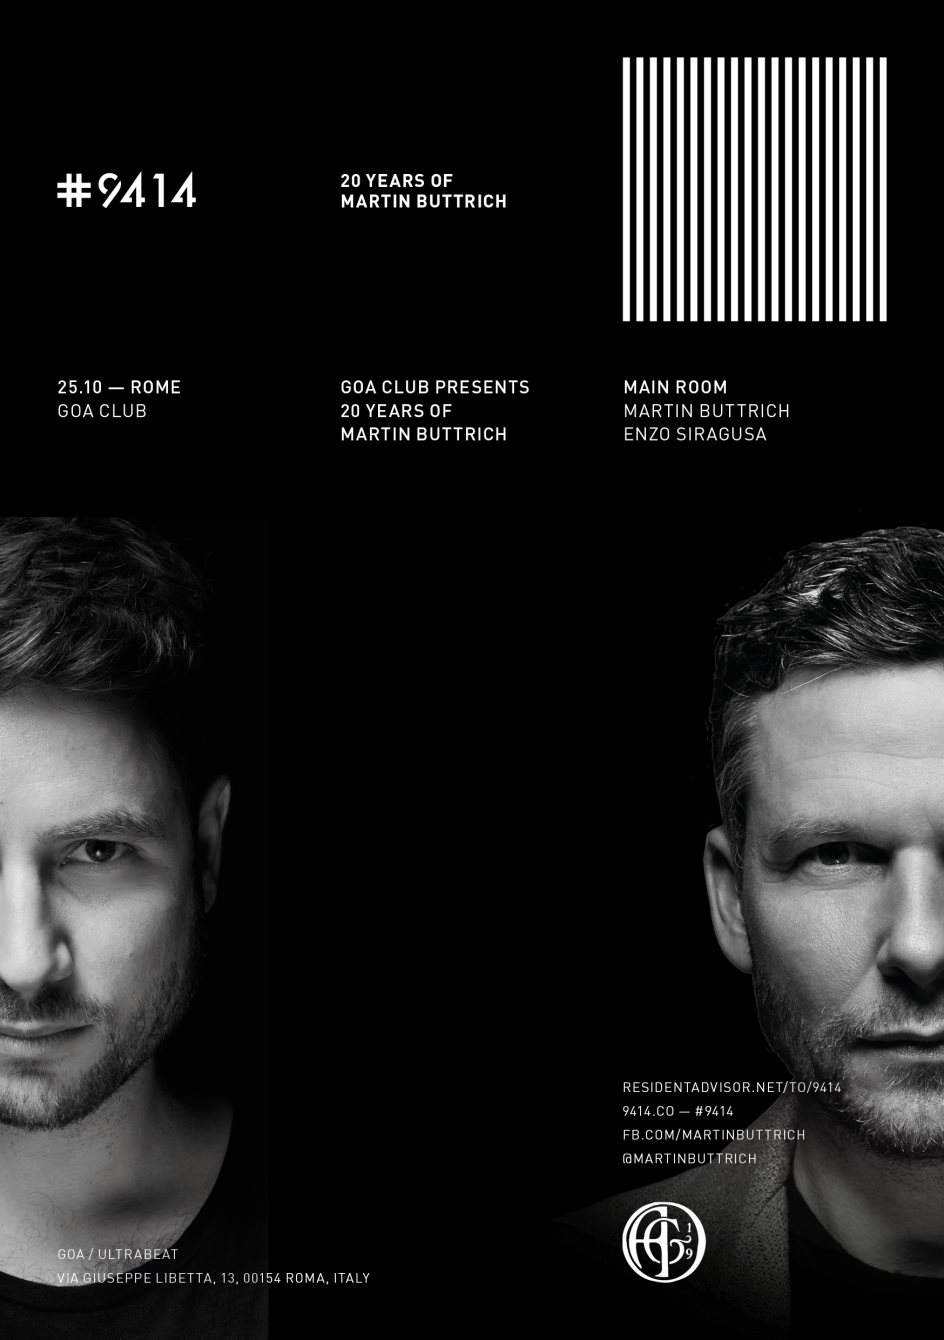 Nozoo presents: #9414, 20 Years of Martin Buttrich with Enzo Siragusa - Página frontal